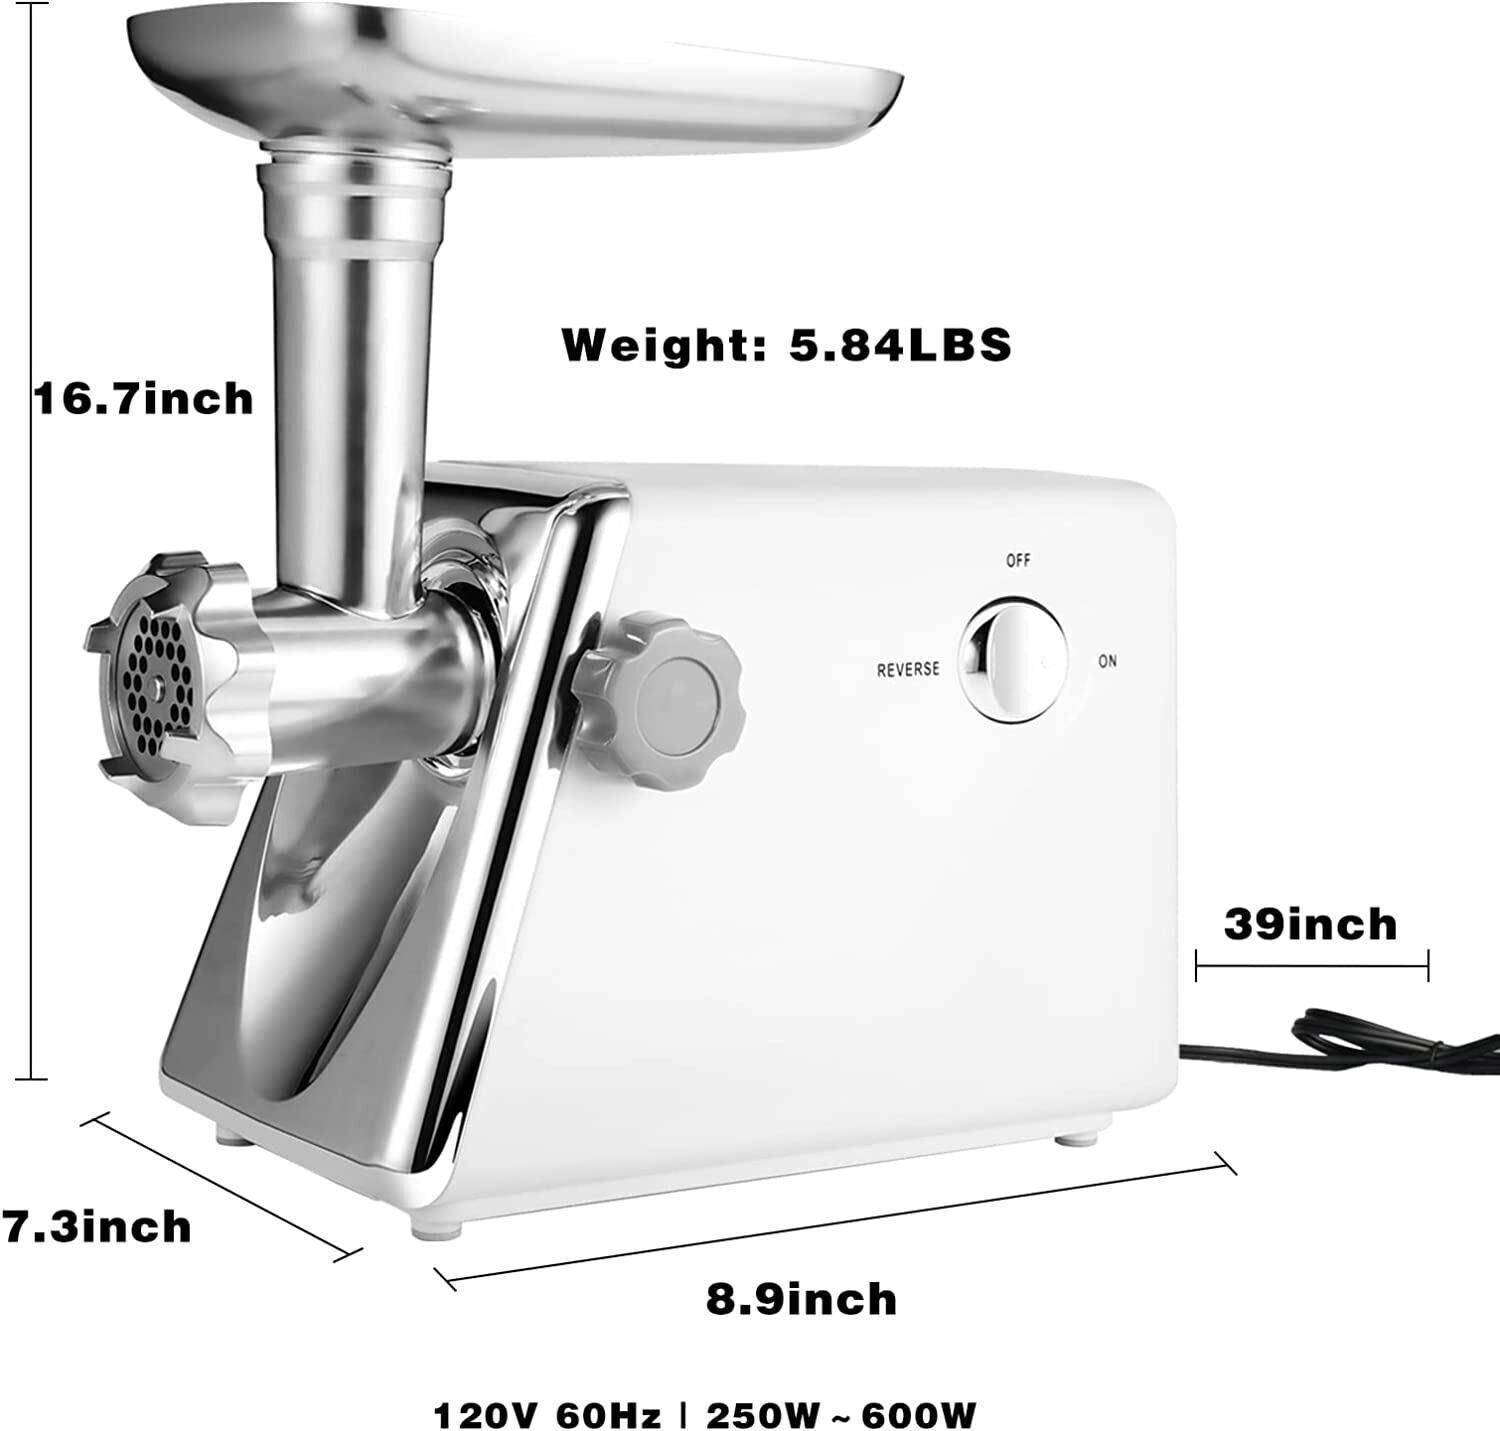 Simple Deluxe Electric Meat Grinder;  Heavy Duty Meat Mincer;  Food Grinder with Sausage & Kubbe Kit;  3 Grinder Plates;  600W Power;  Easy to Clean and Install;  Suitable for Home Kitchen